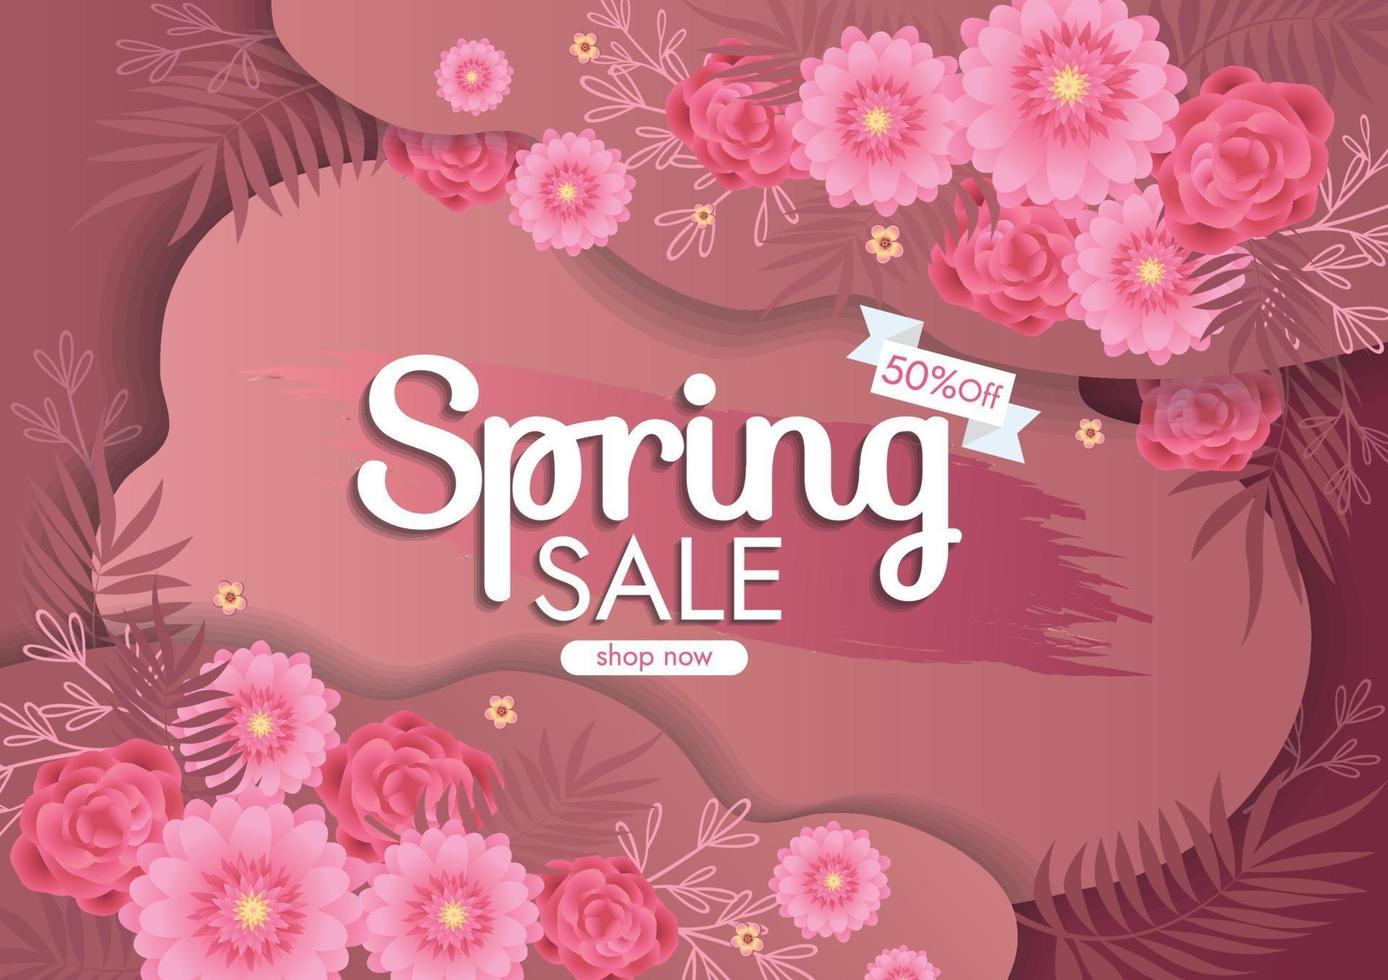 Florals hello spring background for holidays mood vector